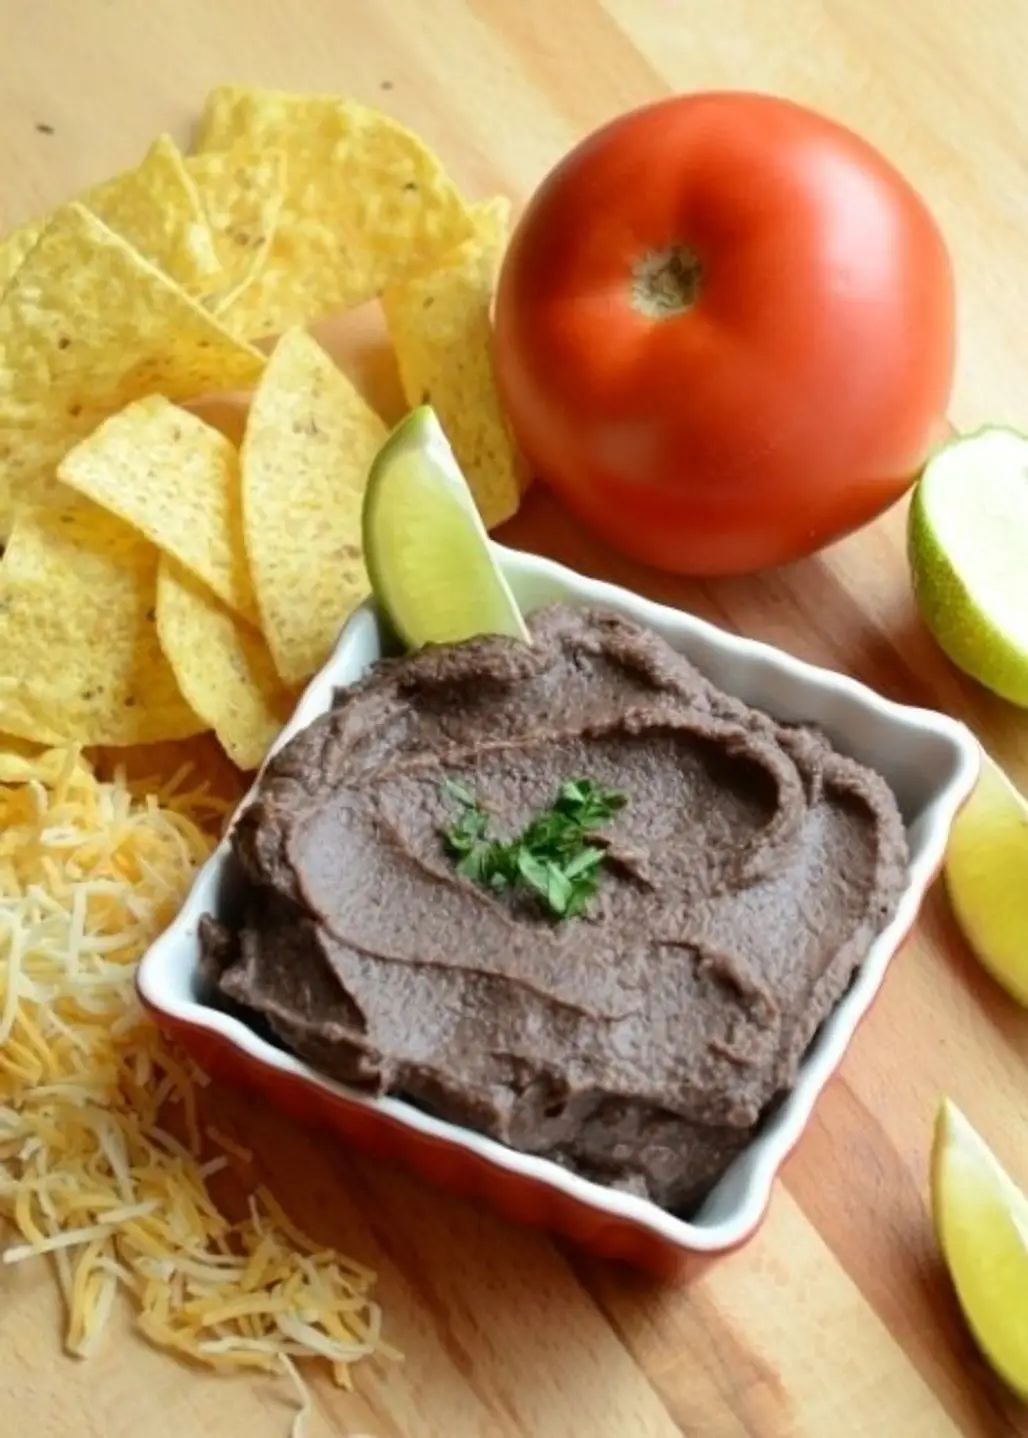 Use Legumes or Beans for a Low-Fat Dip Option